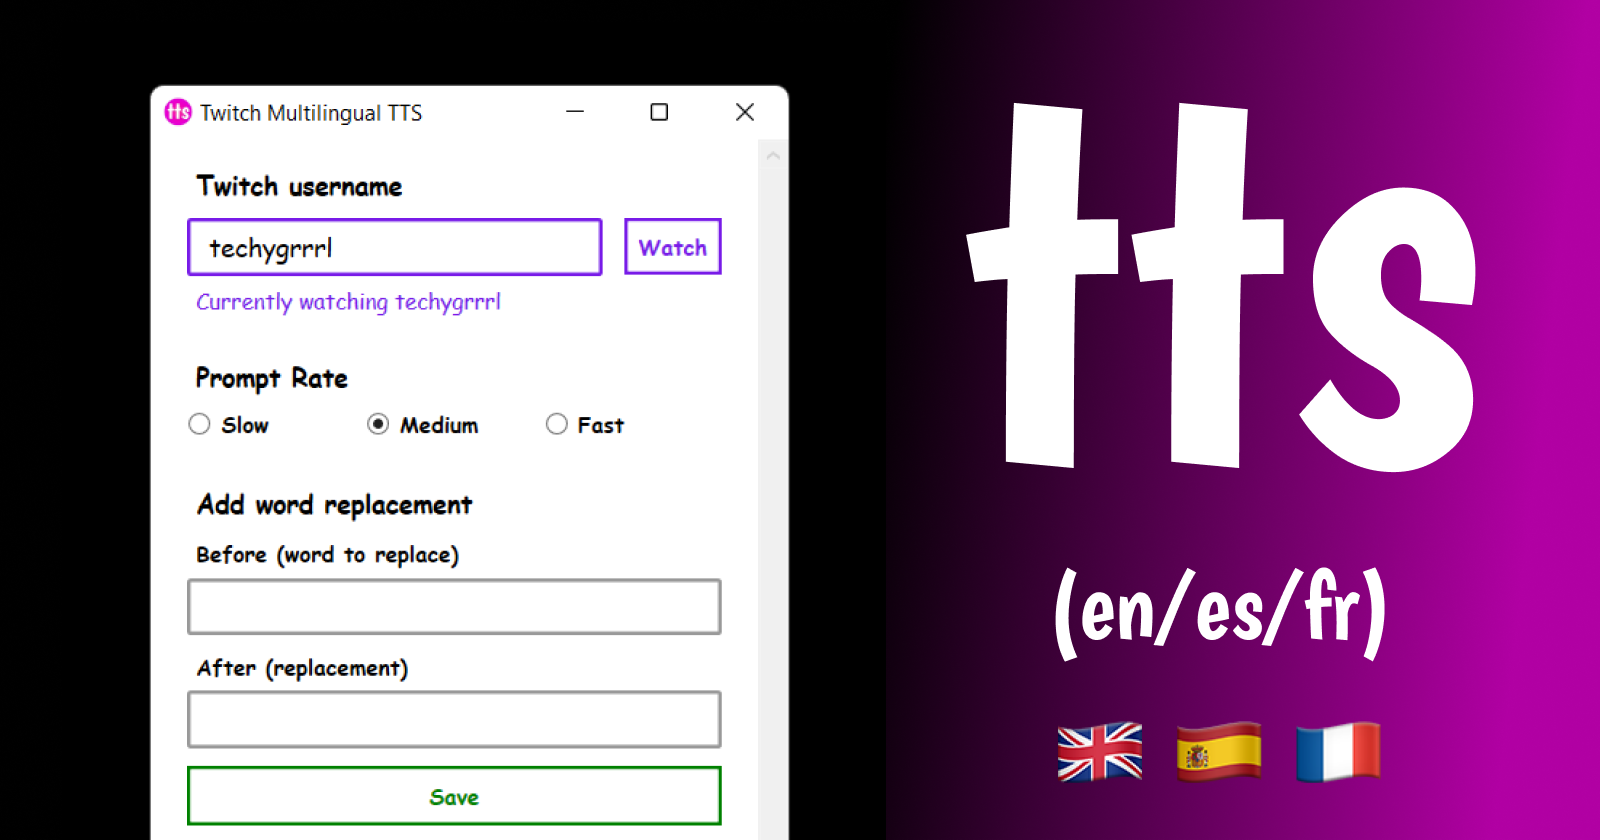 Multilingual TTS app for Twitch screenshot. A light-themed app with purple and pink accents. Includes form elements for word replacements. Text to the right says TTS and (en/es/fr) with country flags UK, Spain and France to advertise as multi-lingual.